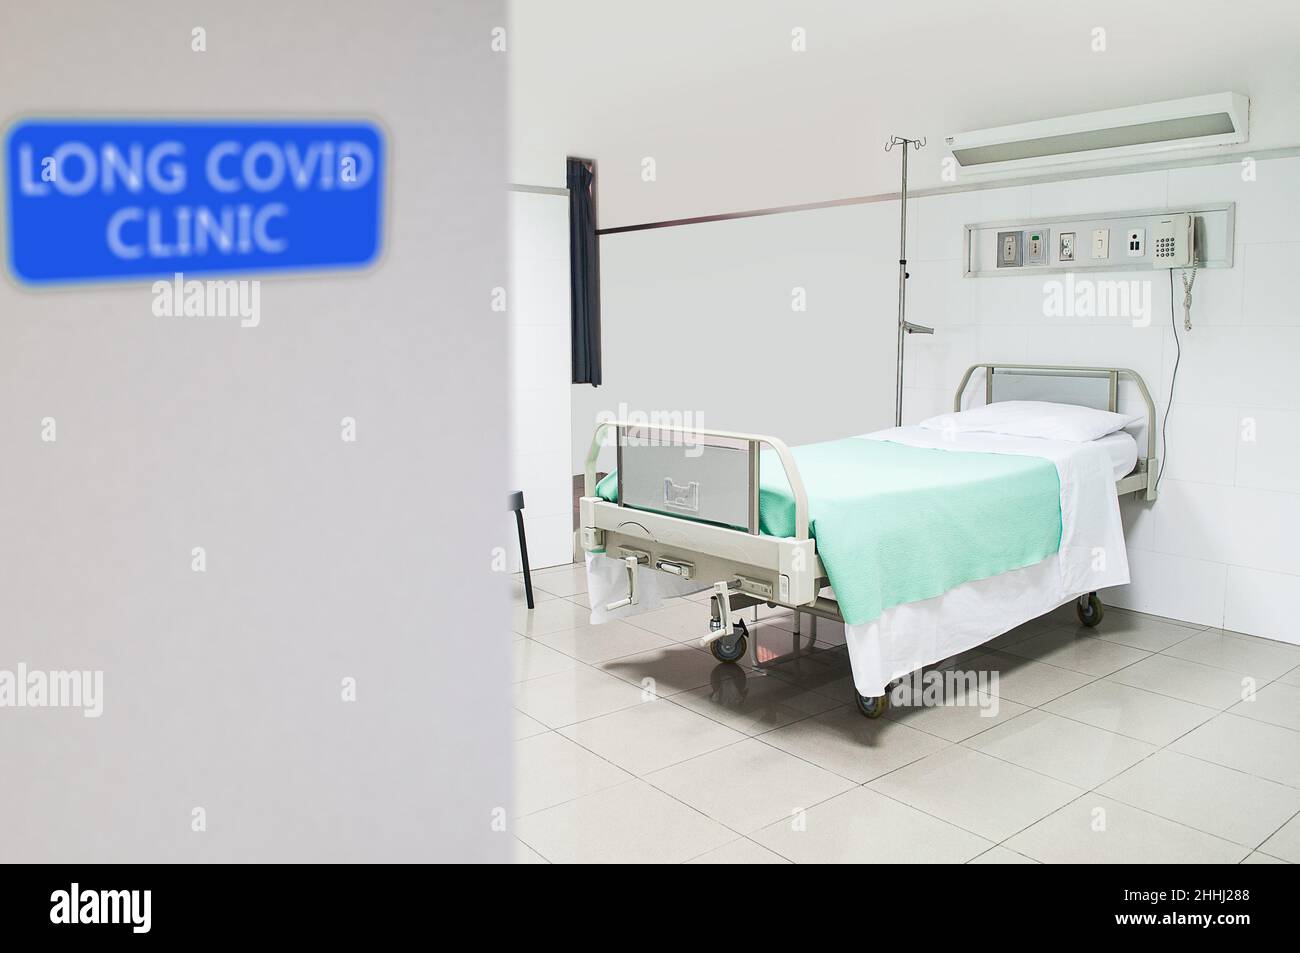 Long covid clinic, treatment room. Long covid is a condition that is marked by the presence of symptoms (such as fatigue, cough, shortness of breath) Stock Photo